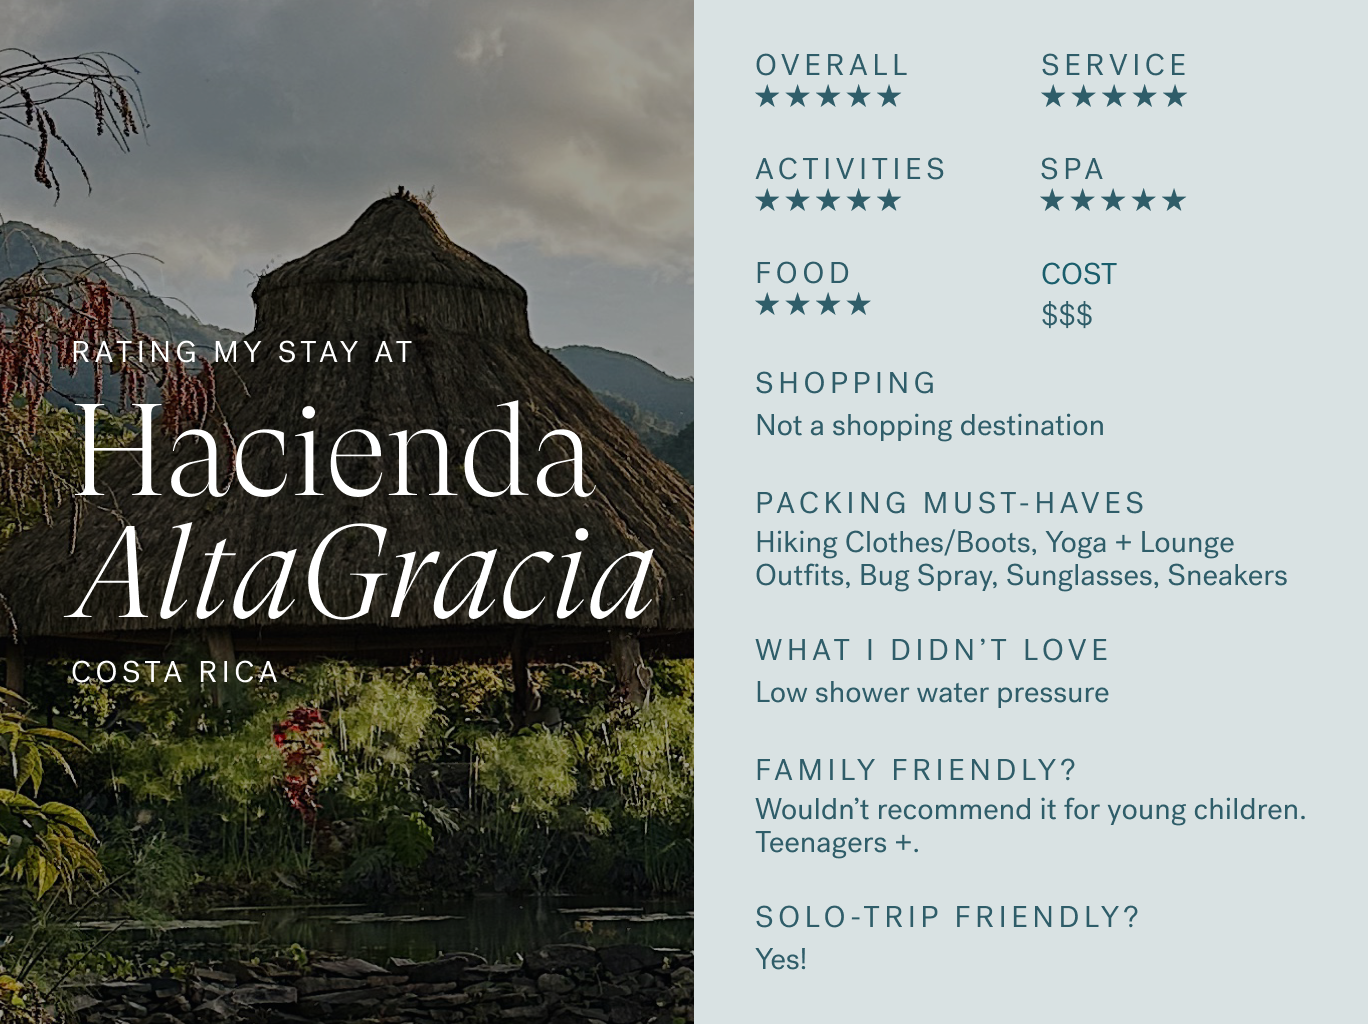 Nancy Twine's rating of her stay at Hacienda AltaGracia while traveling solo in Costa Rica 